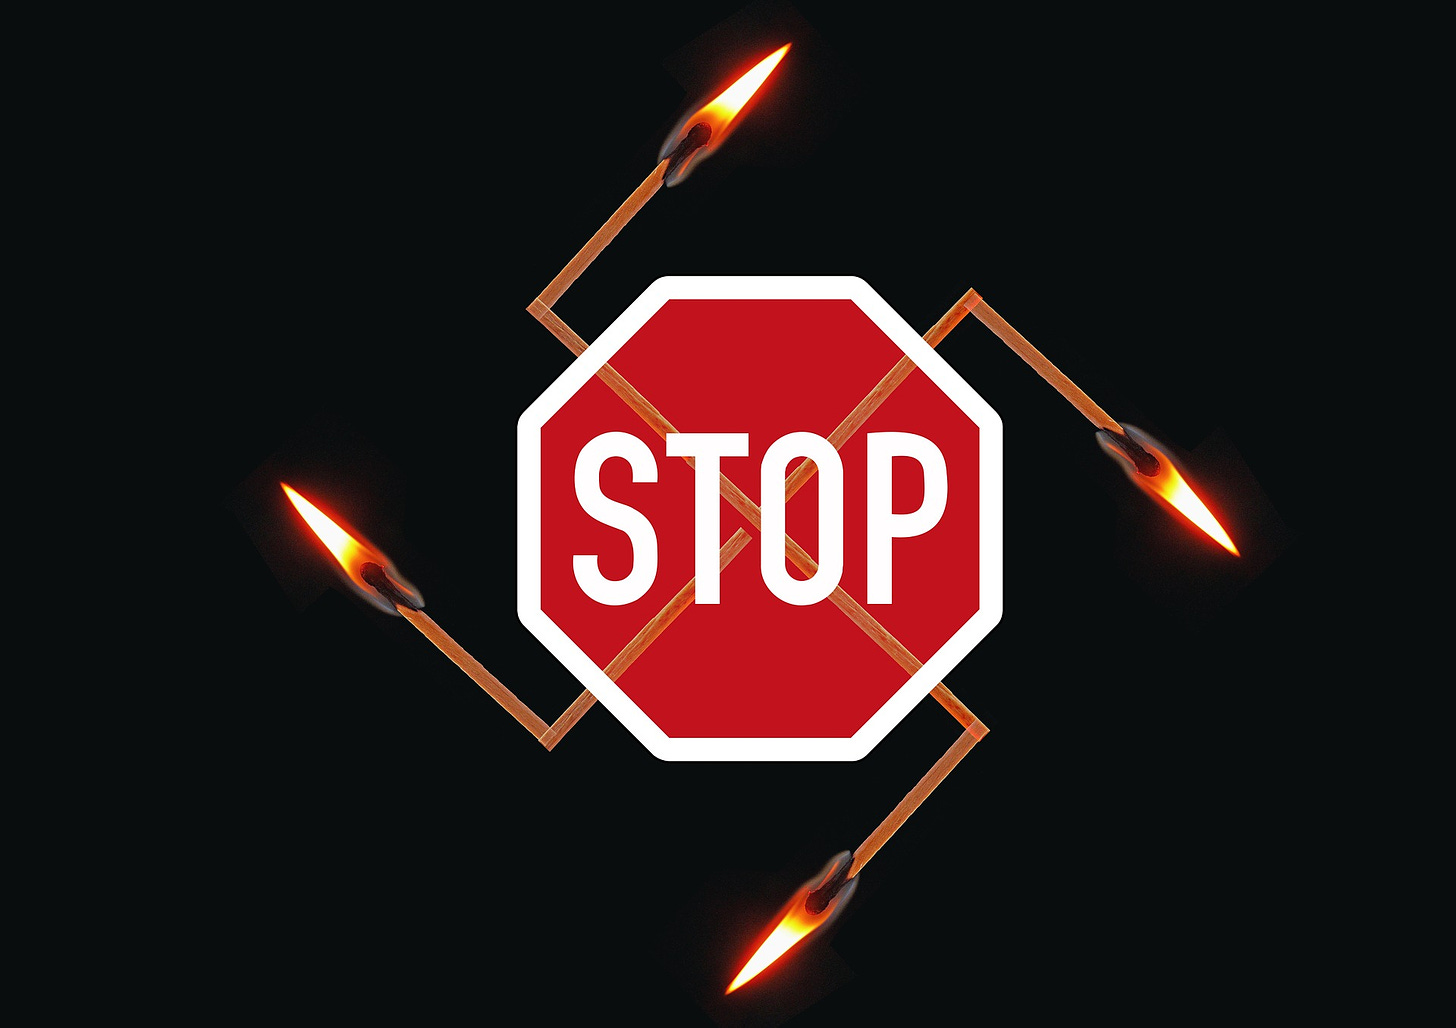 Burning swastika with STOP sign superimposed